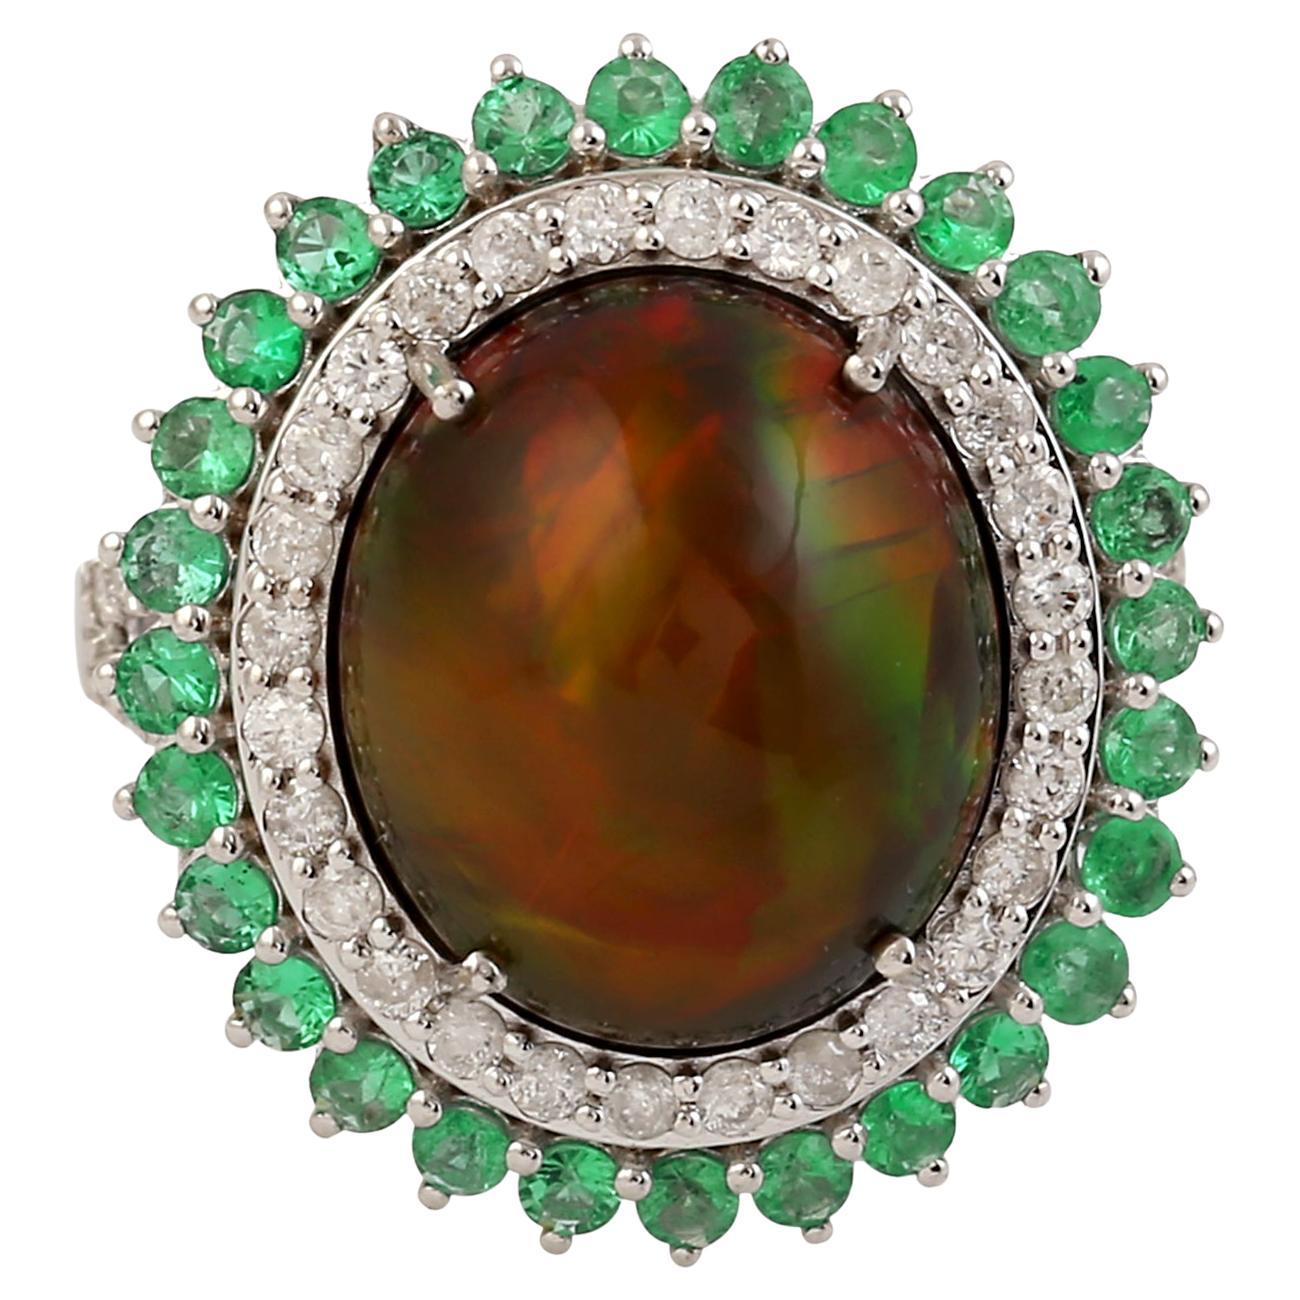 Oval Shped Opal Ring With Emerald & Pave Diamonds Made In 18K White Gold For Sale